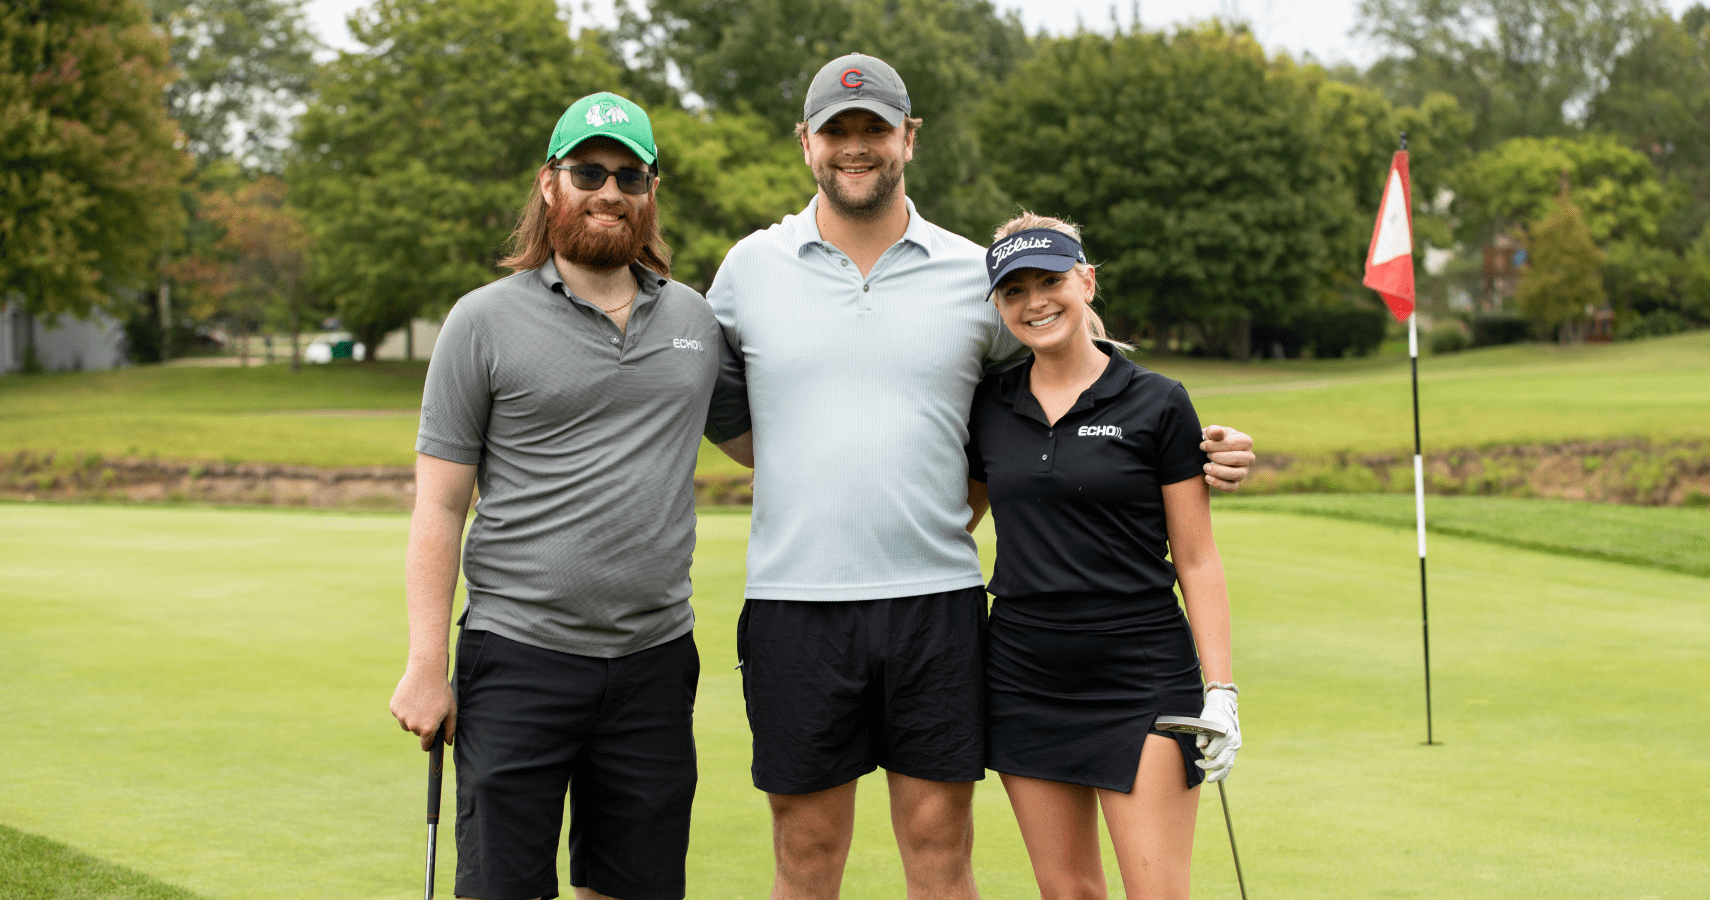 Three Echo employees smiling for a picture at Echo's annual golf outing.